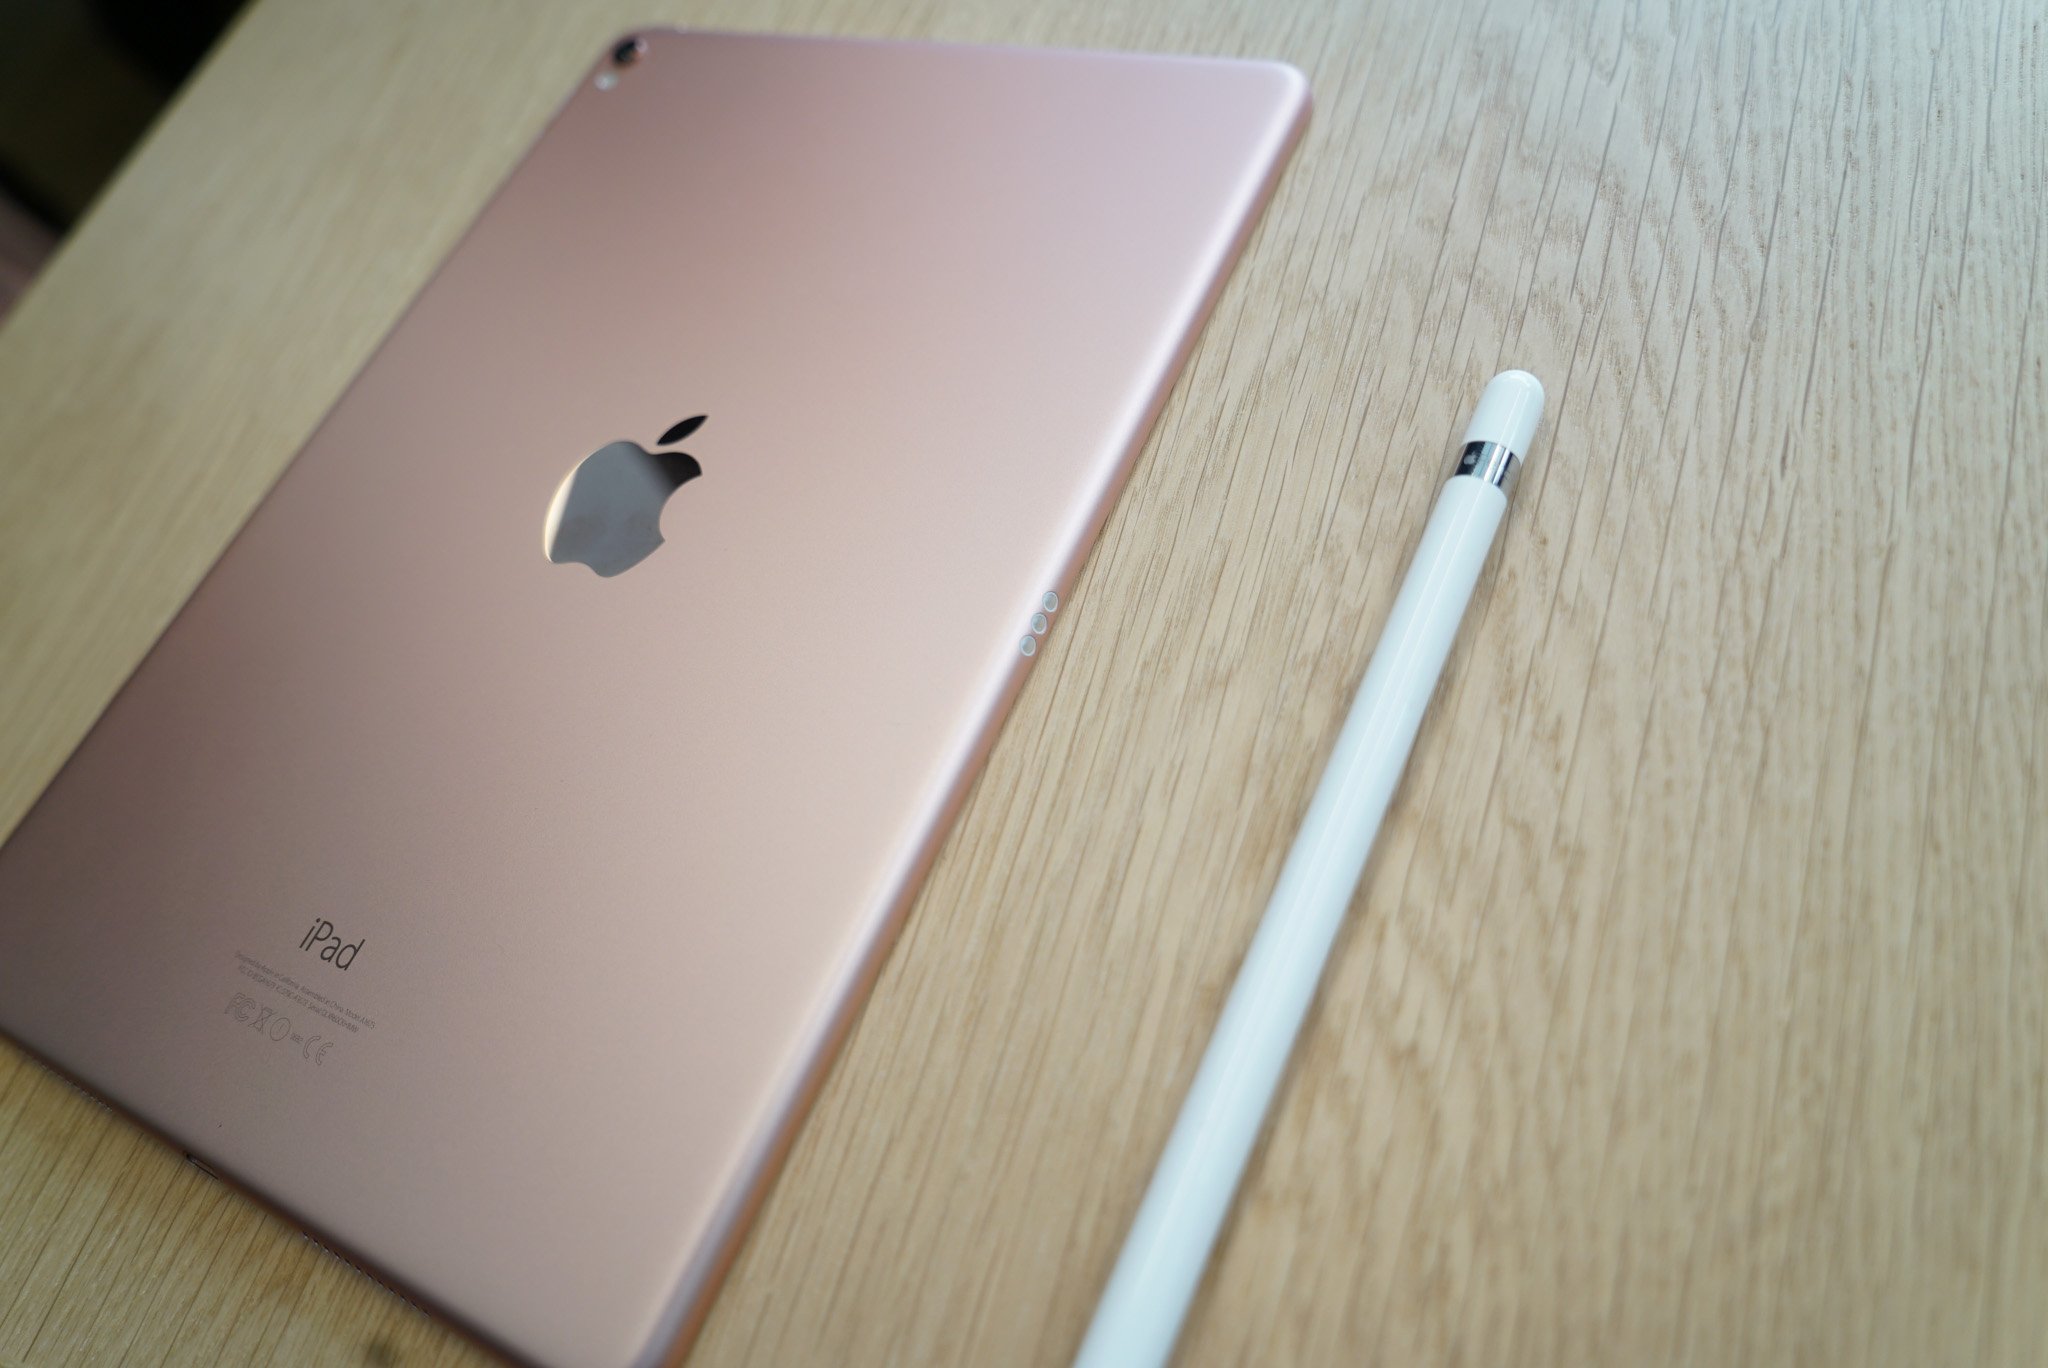 Ipad Pro and pencil as a handwritten note taker